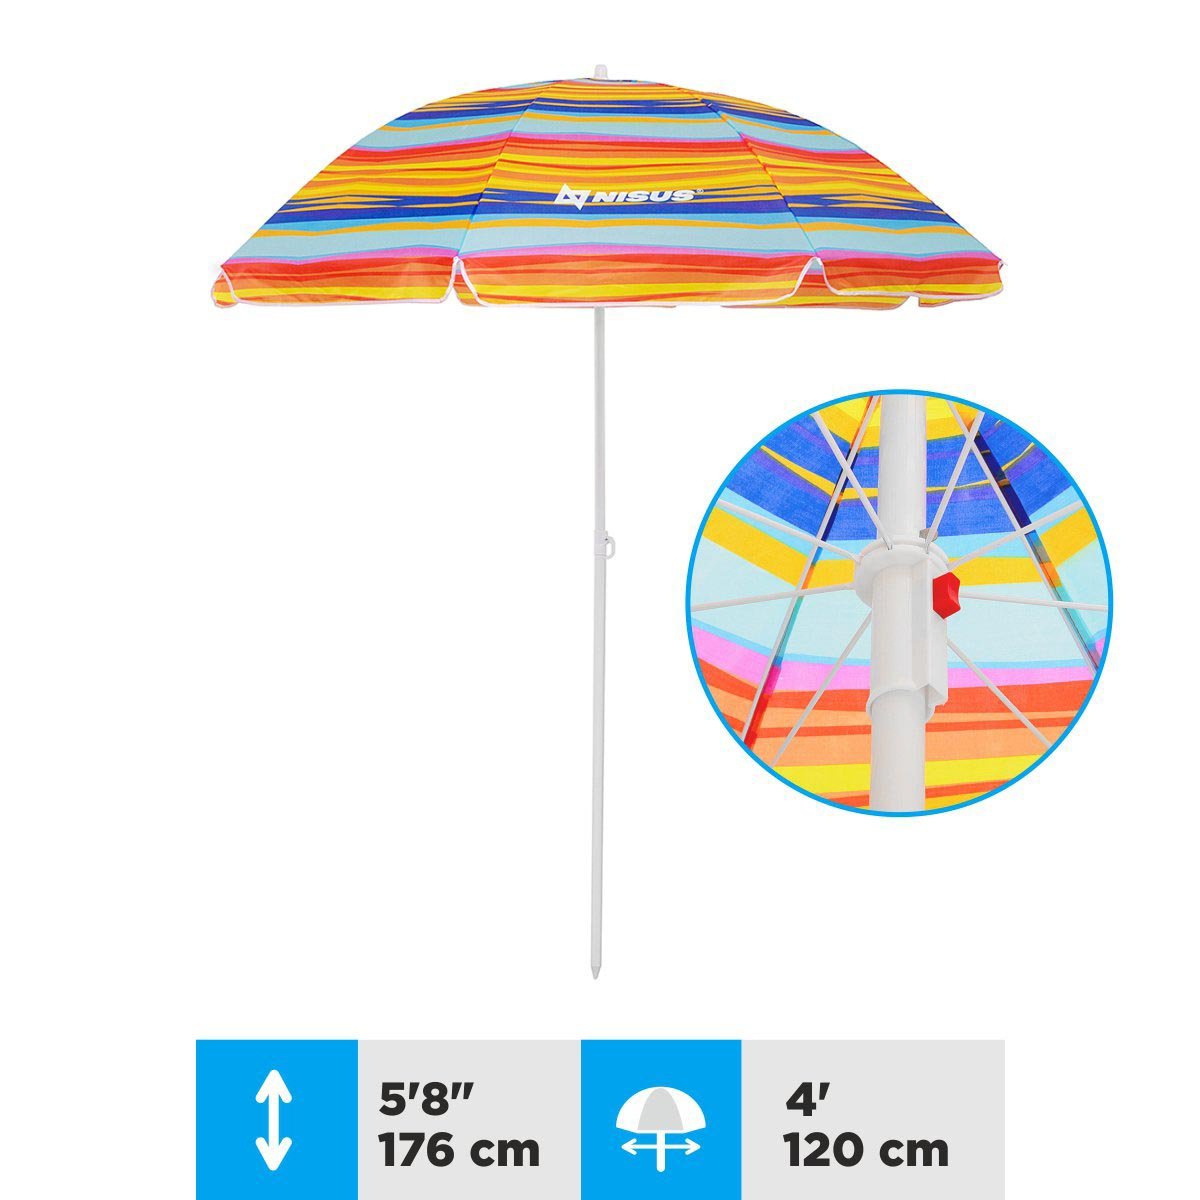 4 ft Bright Folding Beach Umbrella with Sand Anchor is 5 feet 8 inches high